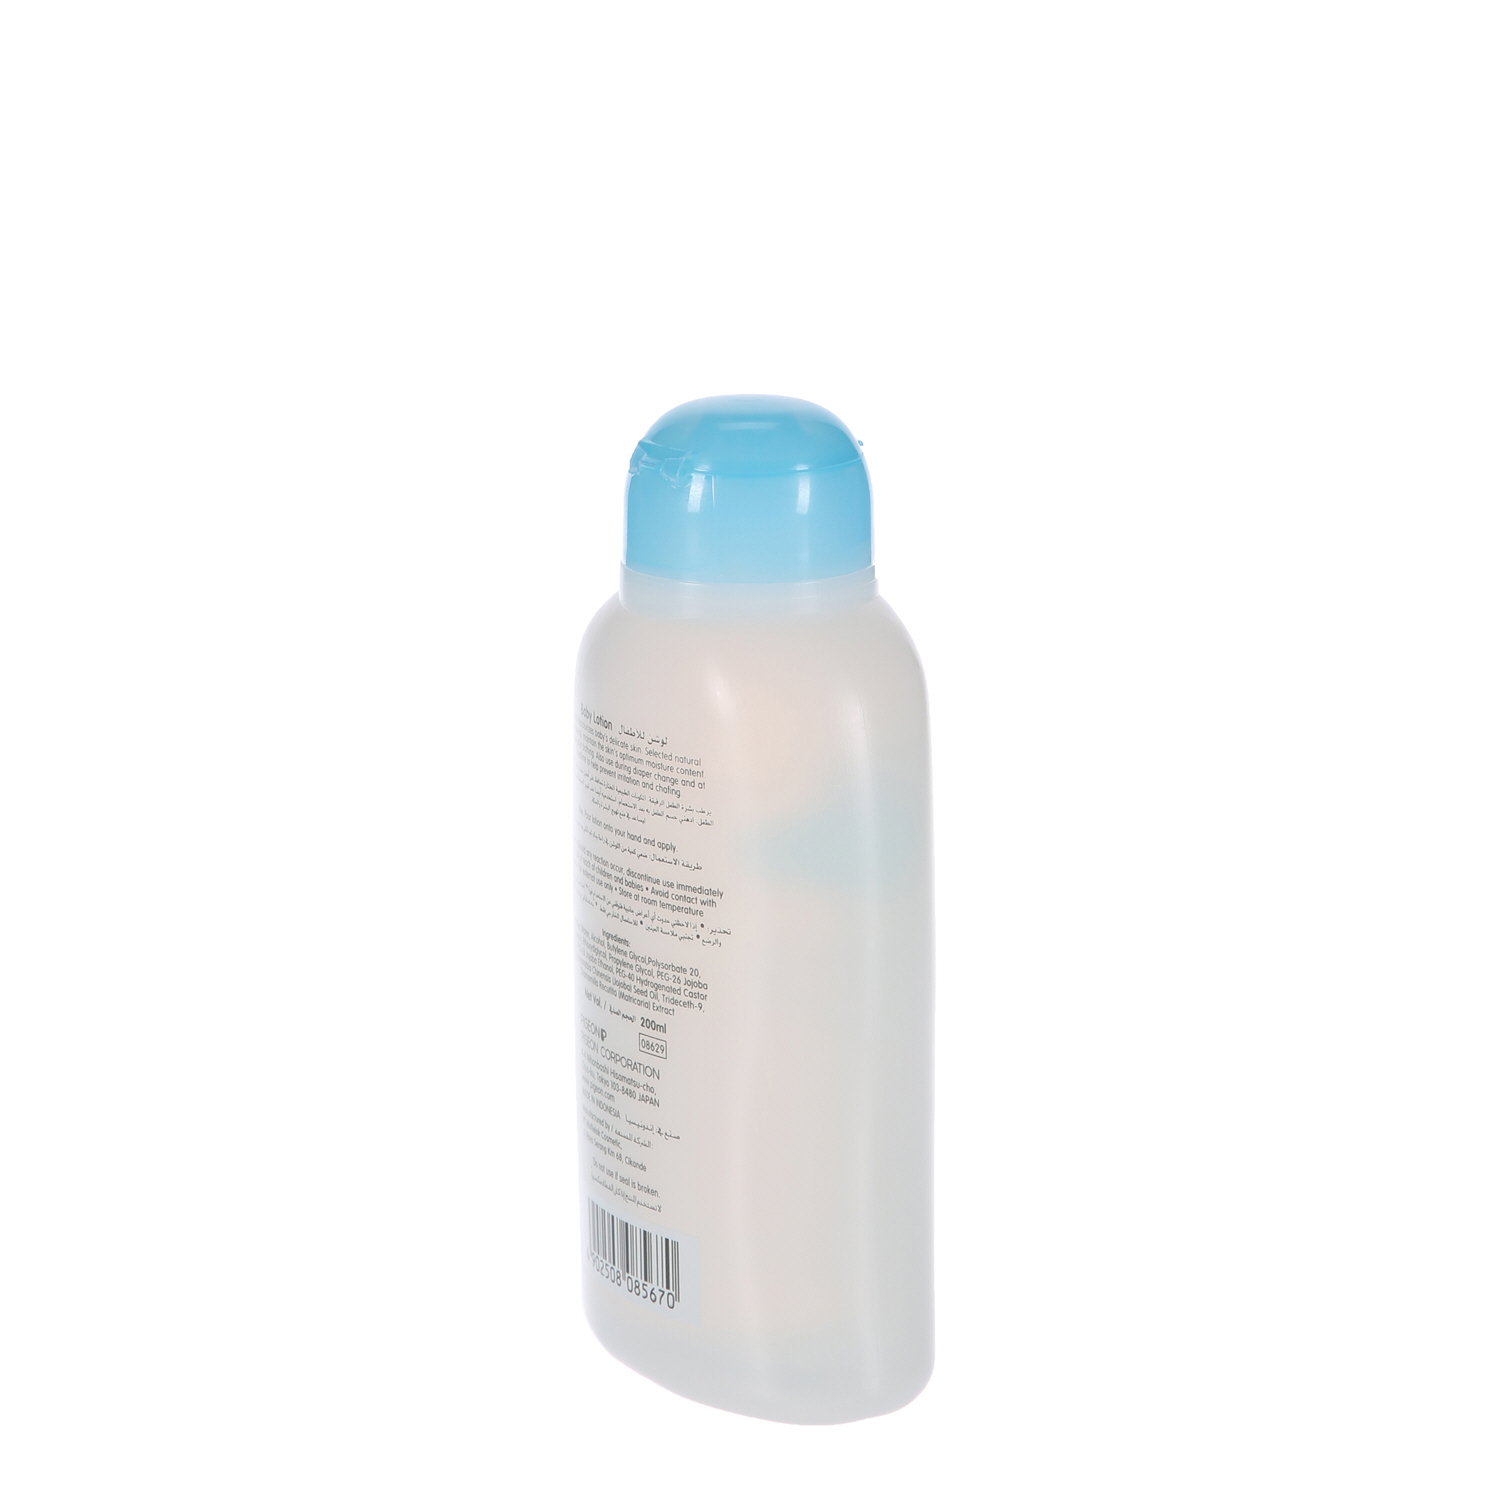 Pigeon Baby Lotion 200 ml